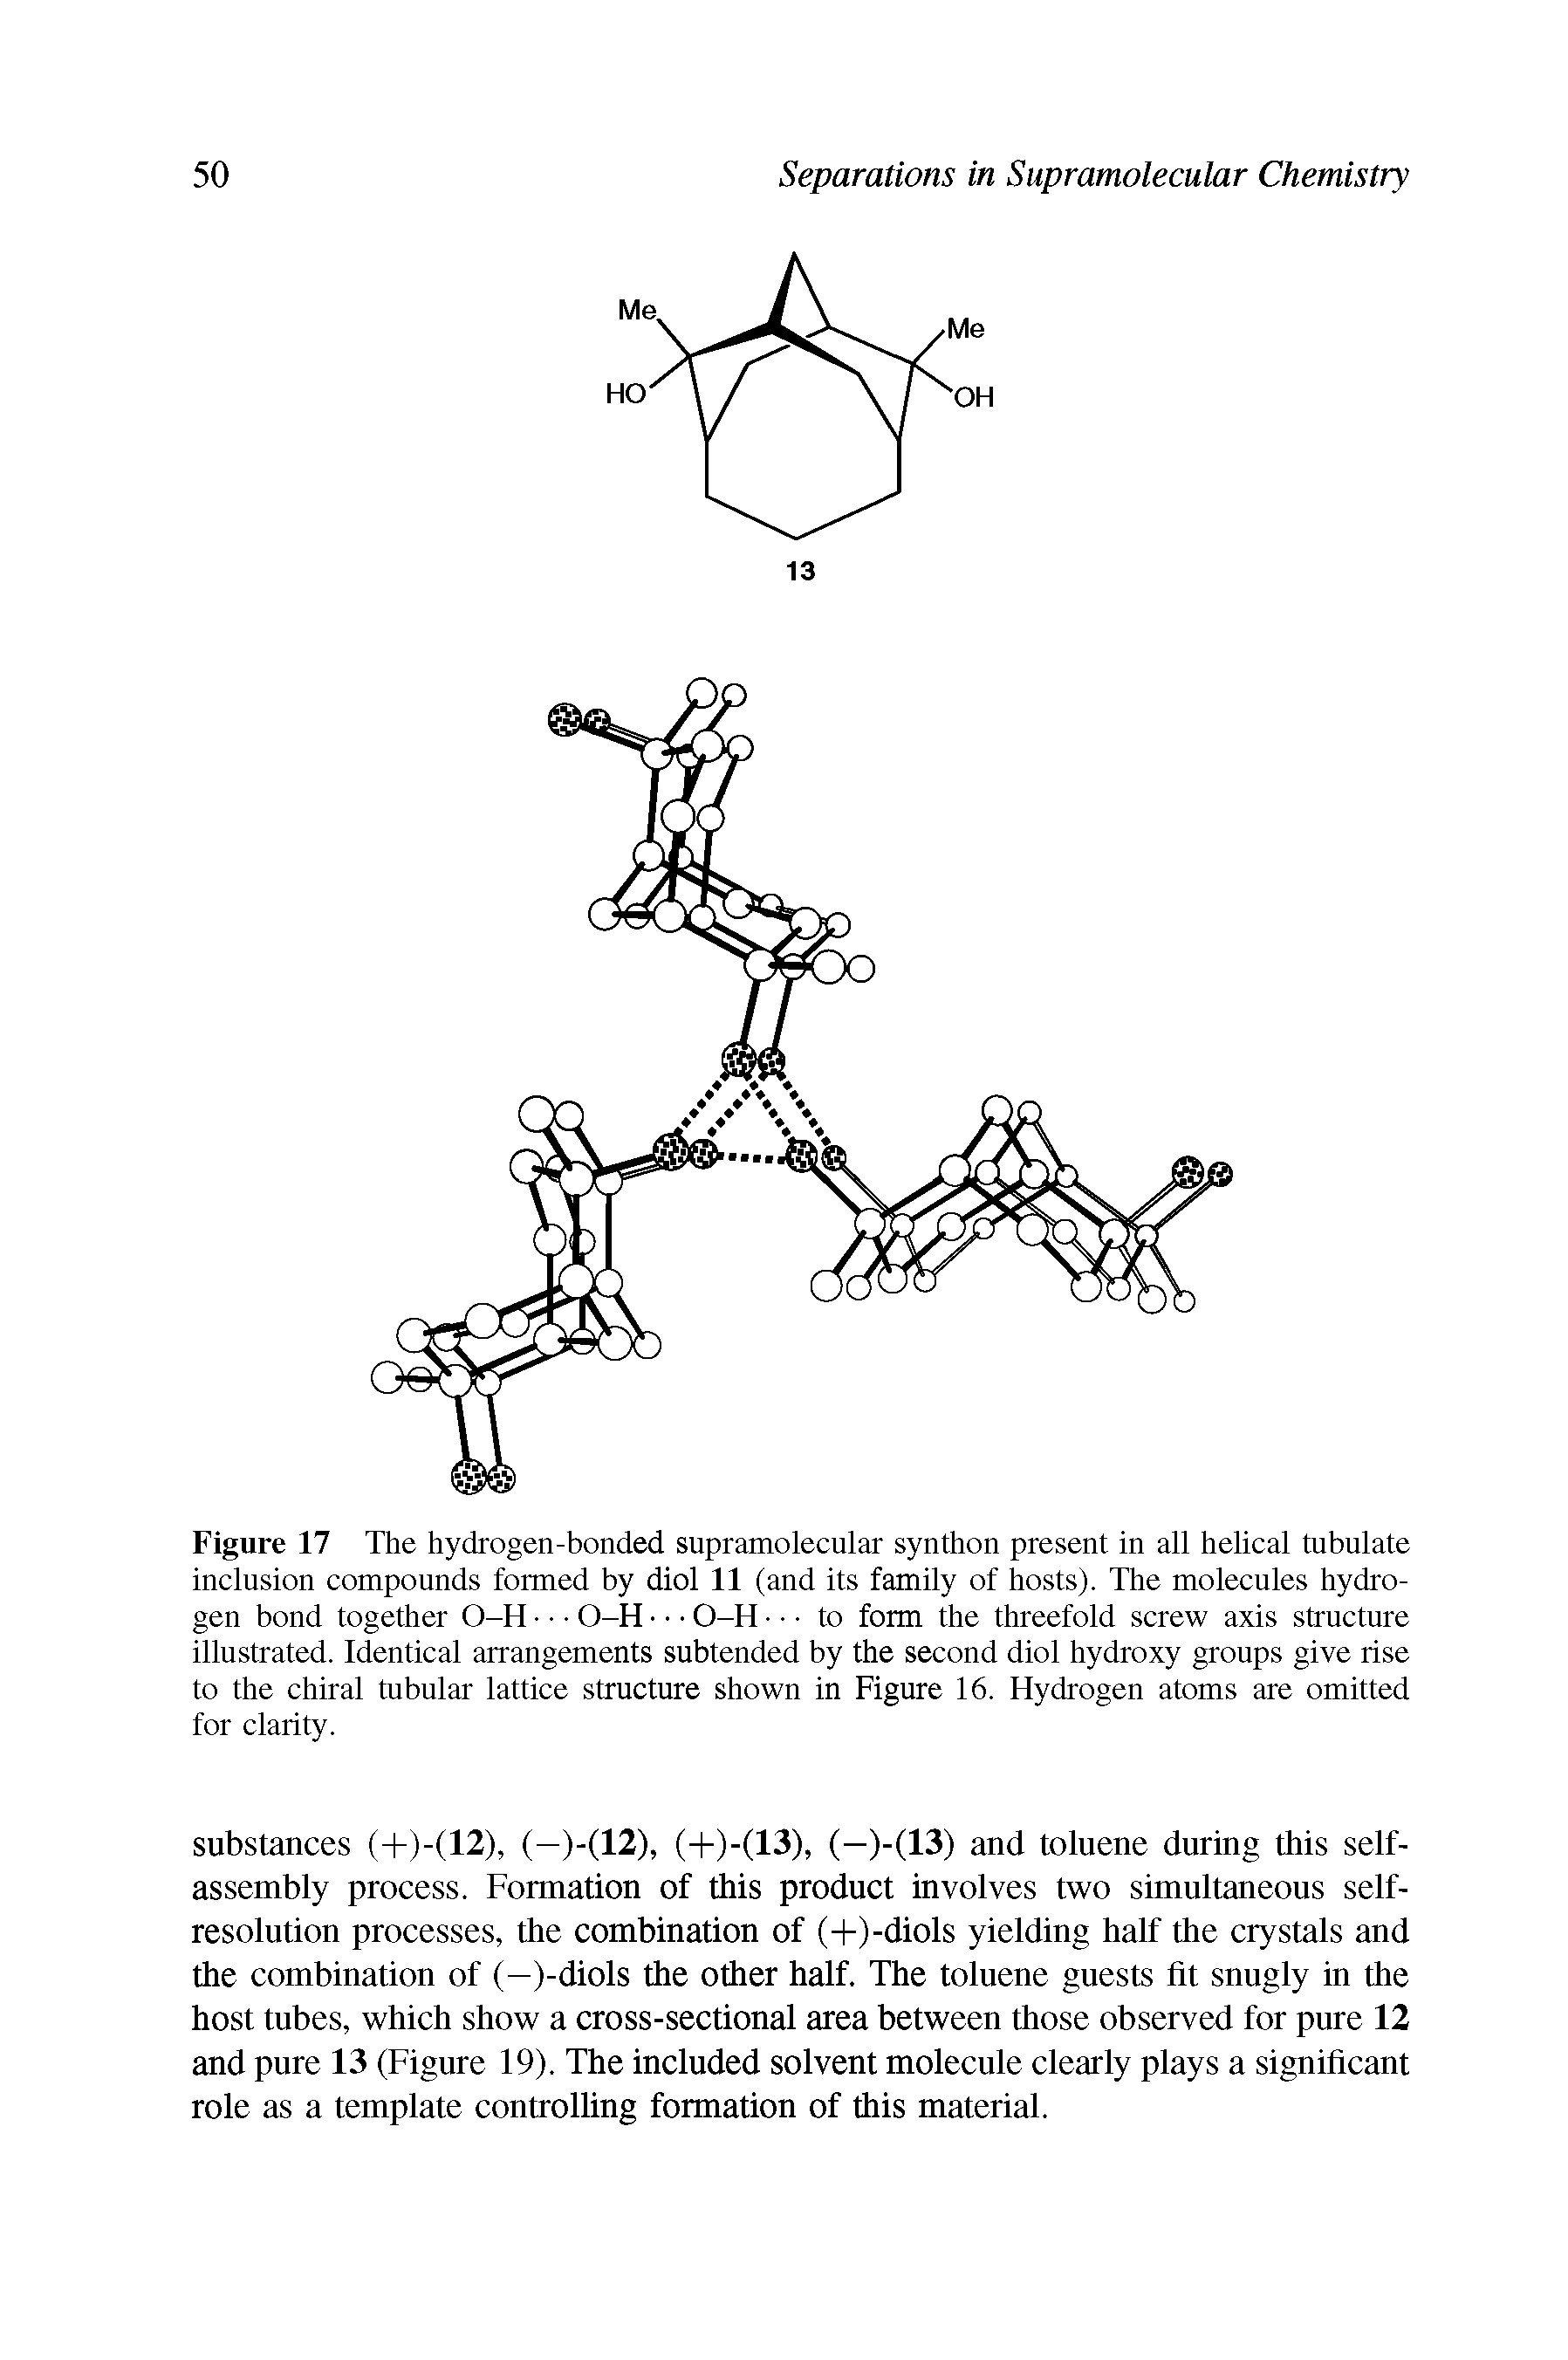 Figure 17 The hydrogen-bonded supramolecular synthon present in all helical tubulate inclusion compounds formed by diol 11 (and its family of hosts). The molecules hydrogen bond together O-H O-H O-H to form the threefold screw axis structure illustrated. Identical arrangements subtended by the second diol hydroxy groups give rise to the chiral tubular lattice structure shown in Figure 16. Hydrogen atoms are omitted for clarity.